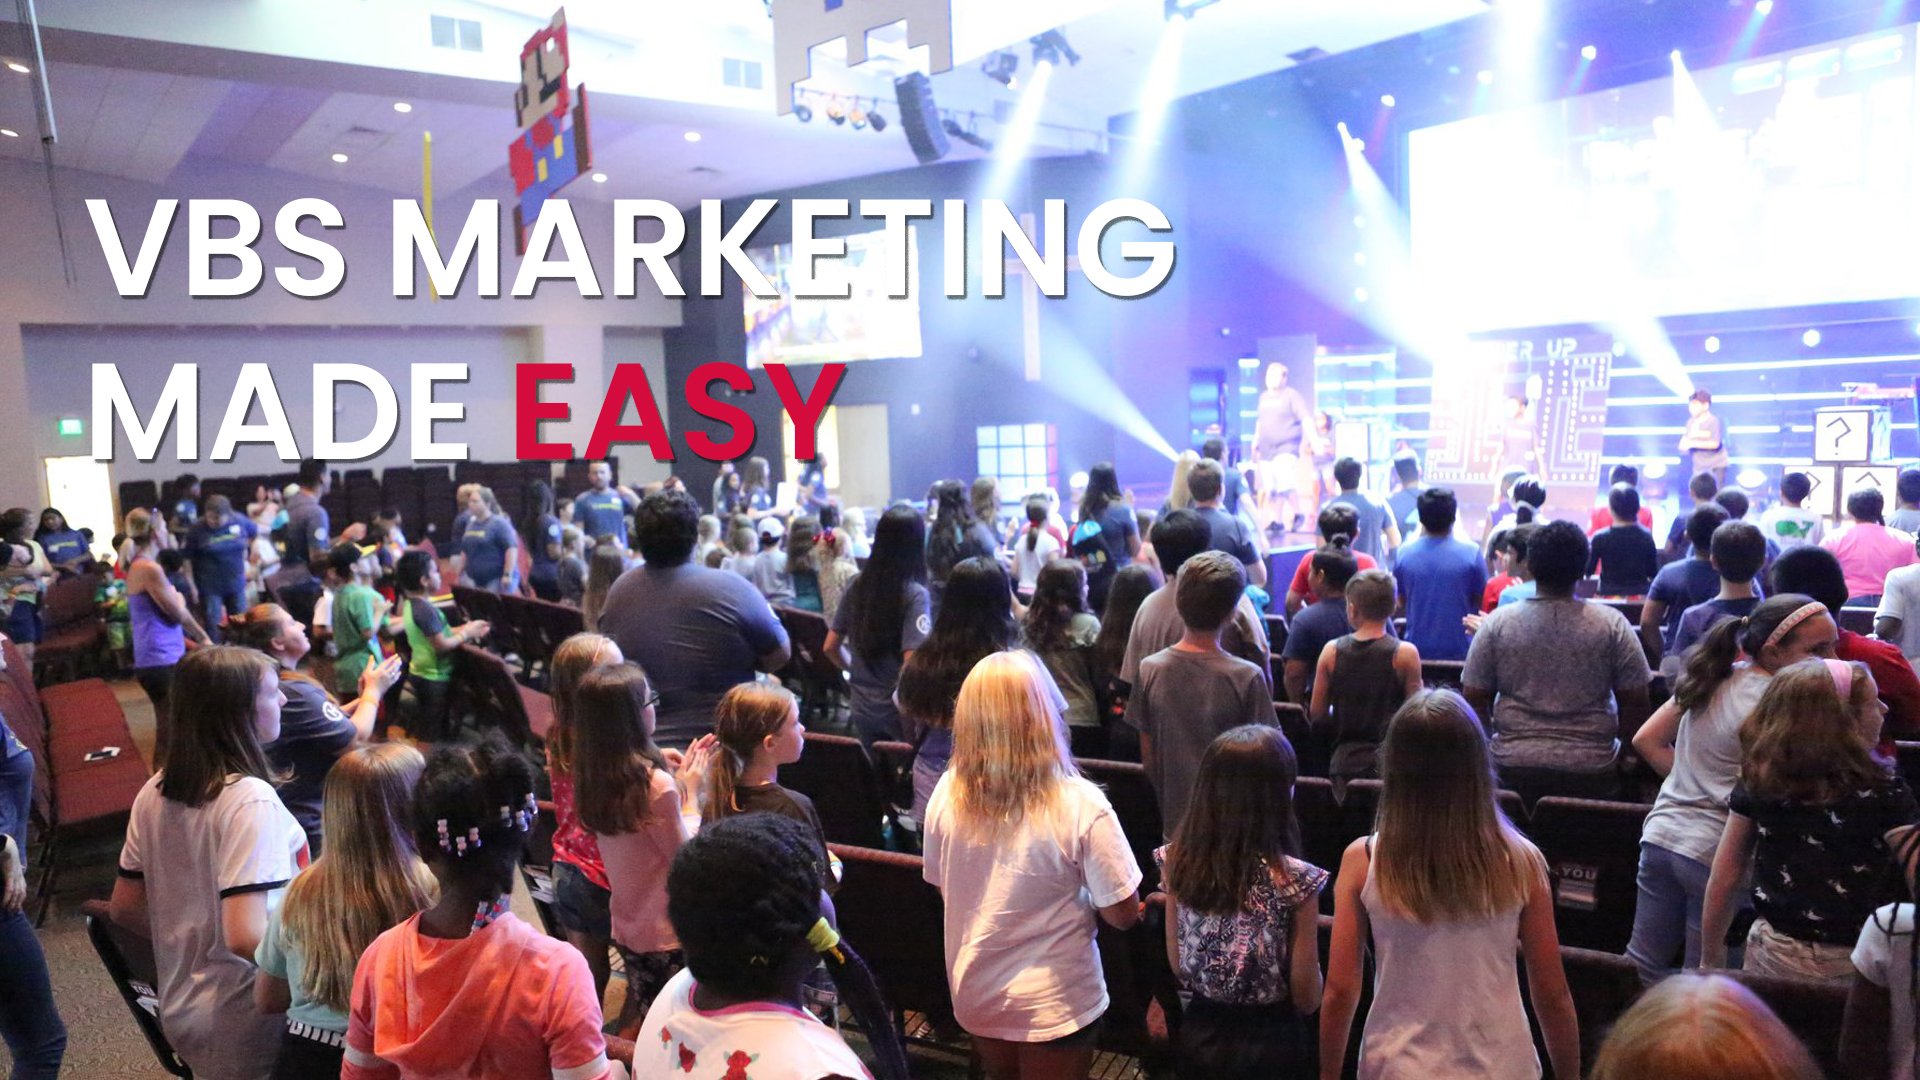 VBS Marketing Made Easy